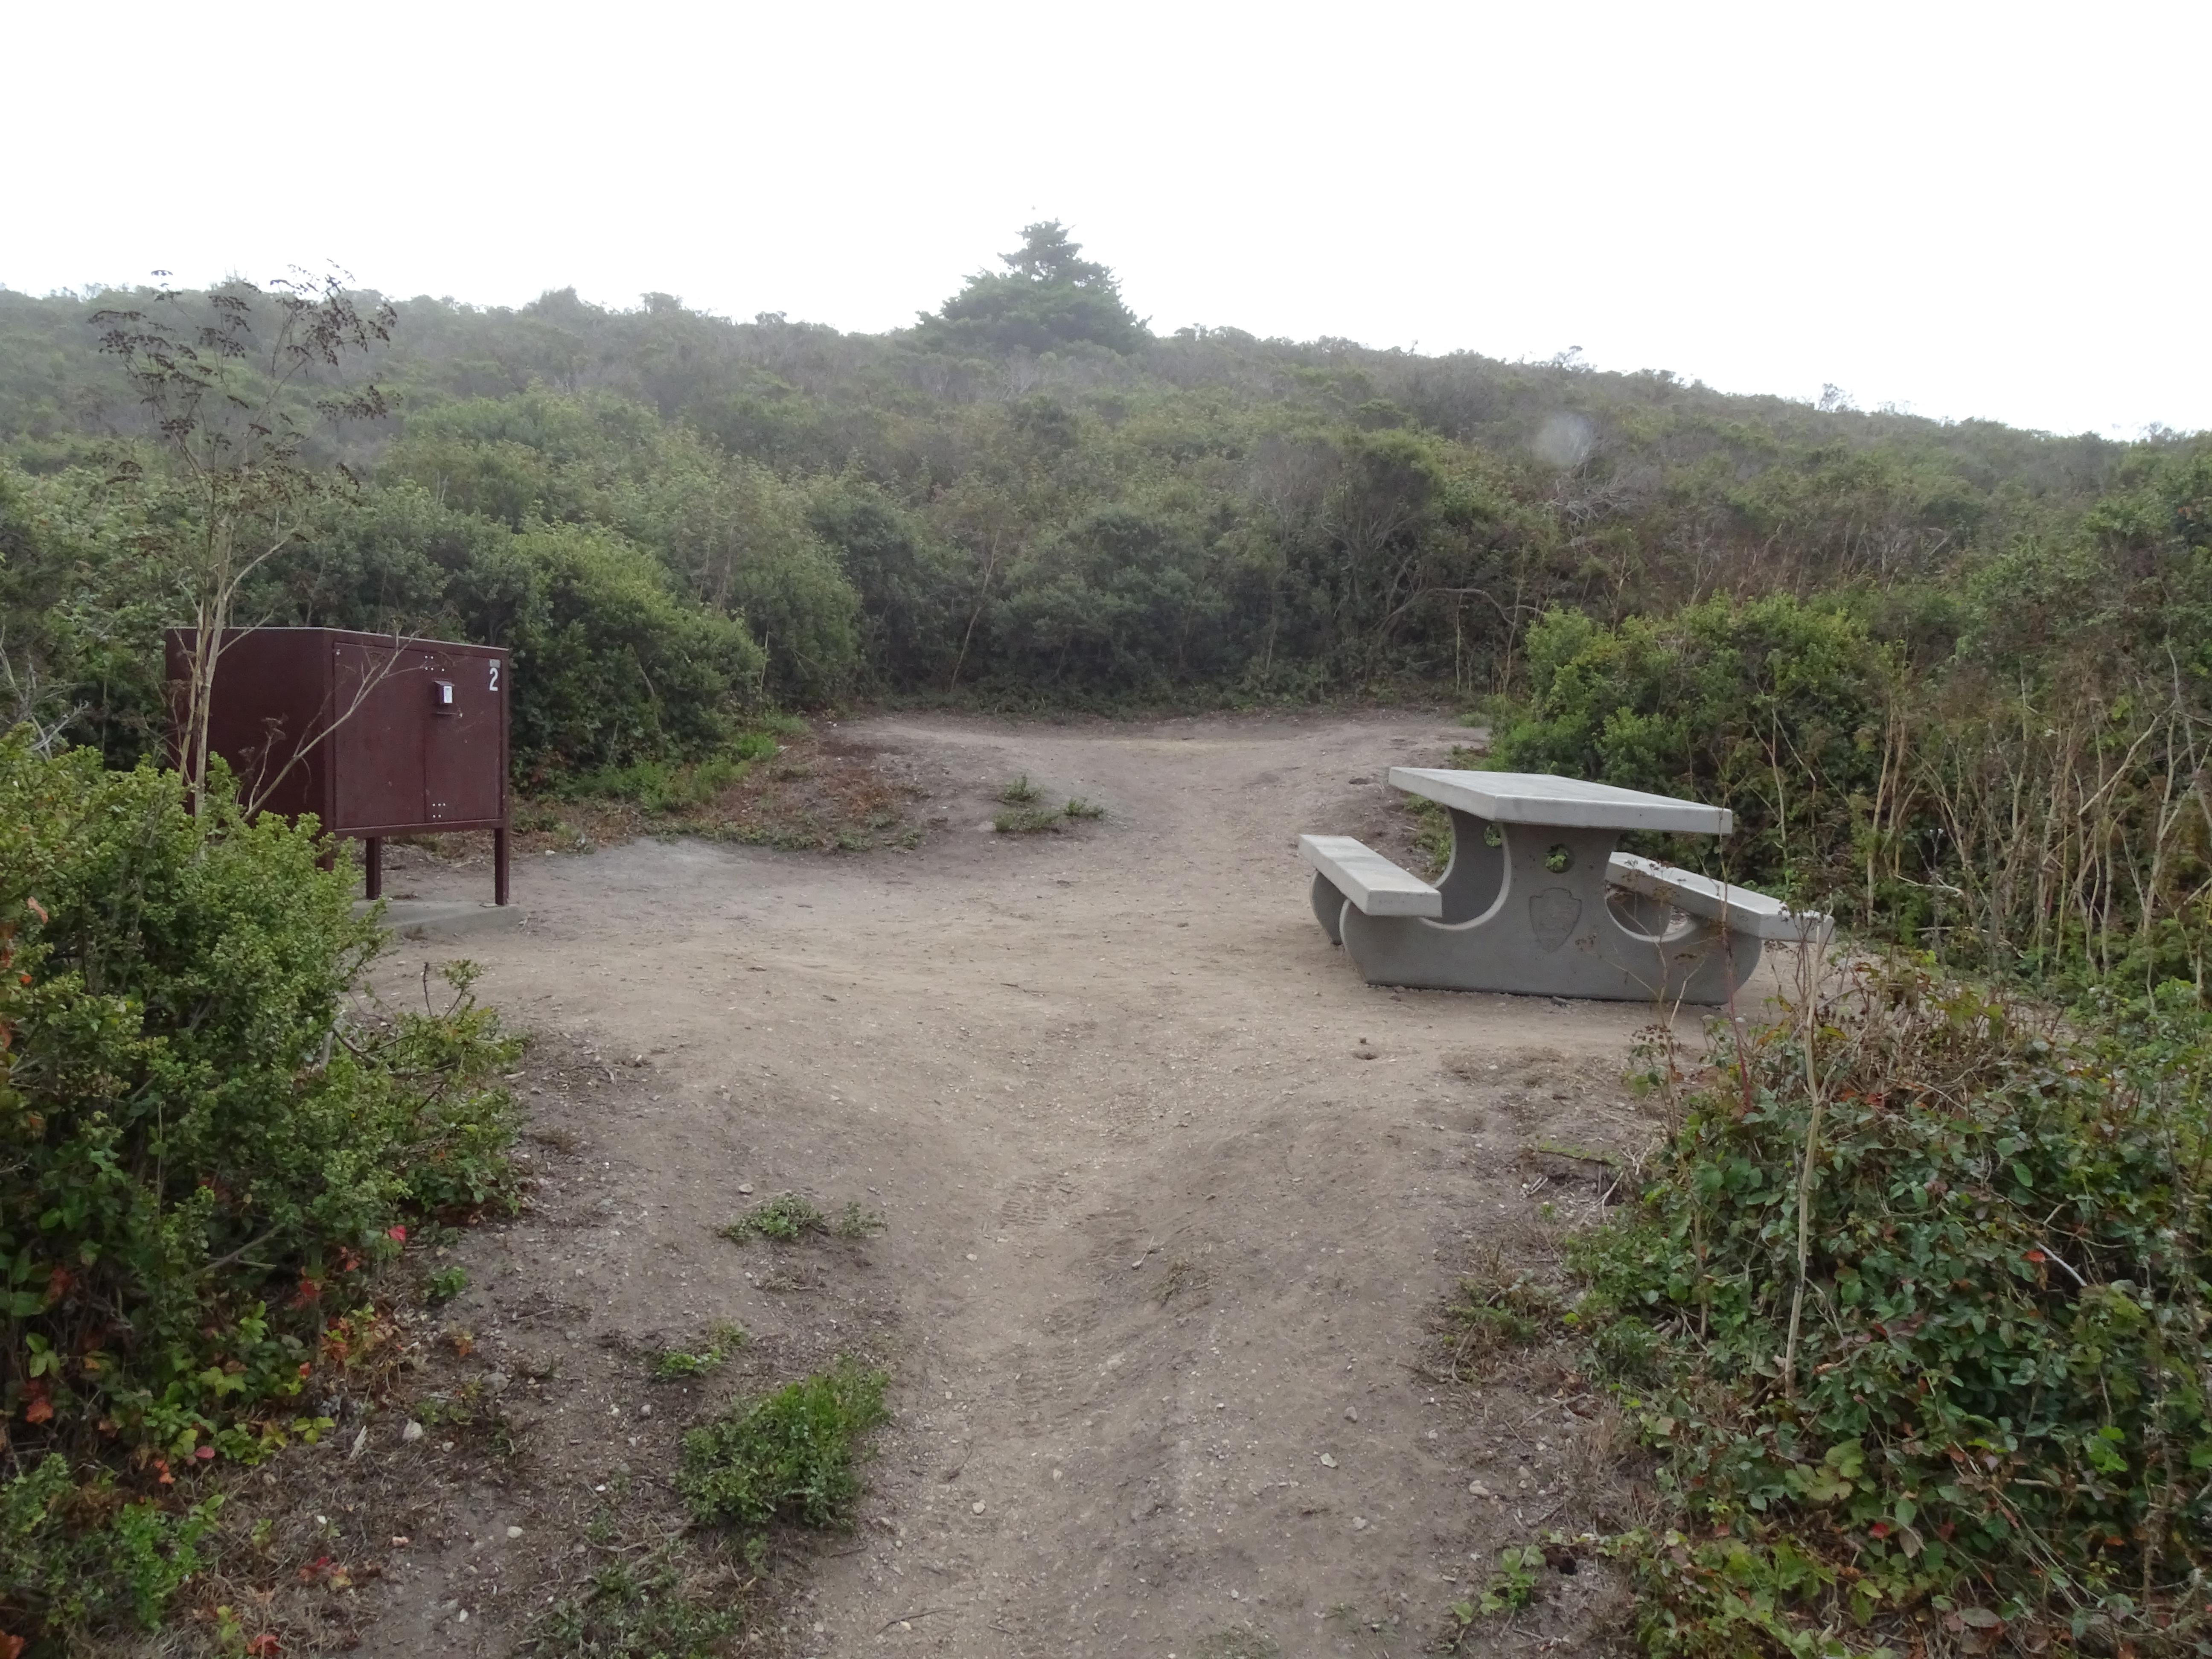 A campsite containing a picnic table and a food storage locker surrounded by shrubs.